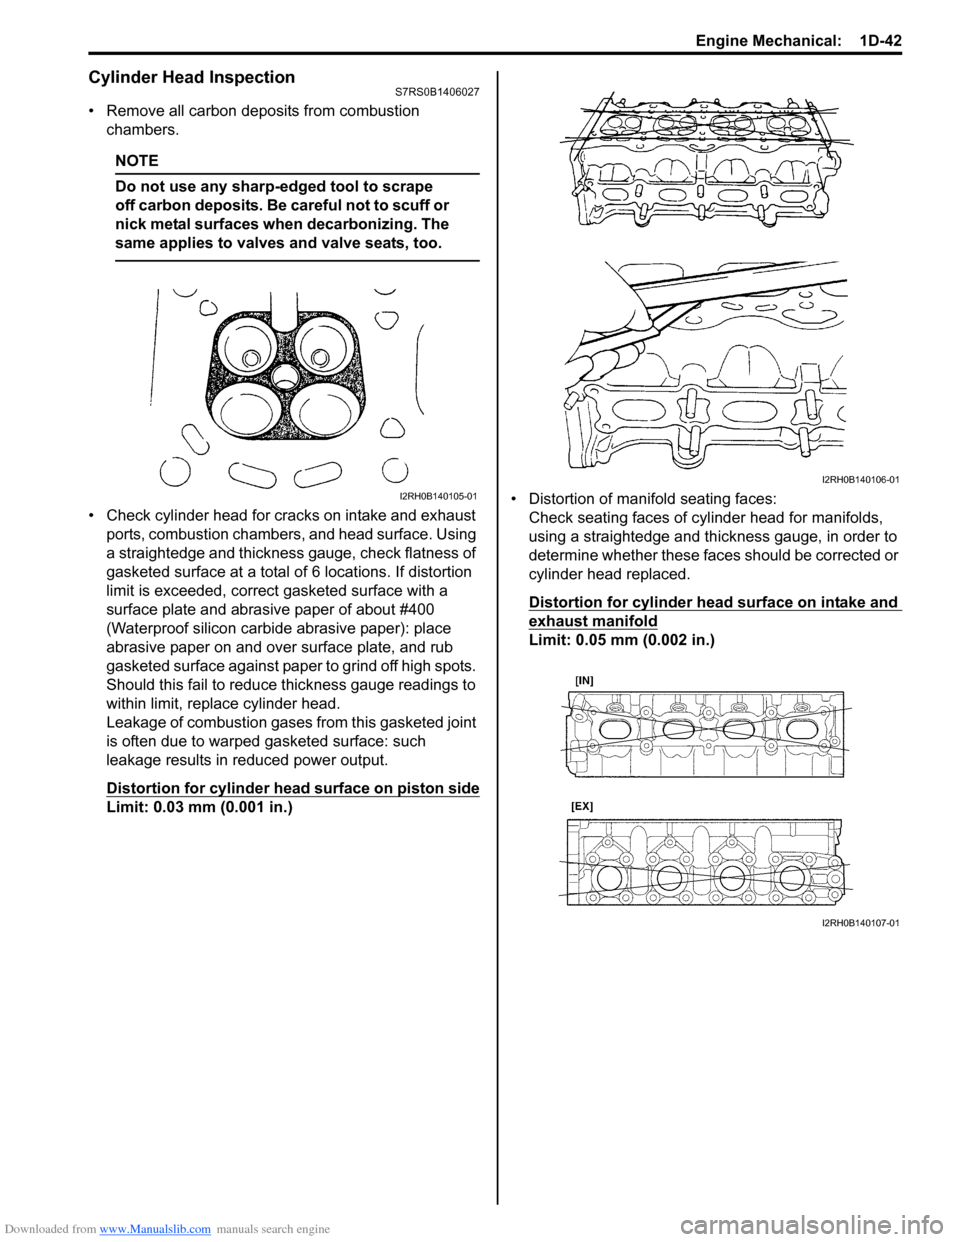 SUZUKI SWIFT 2008 2.G Service Workshop Manual Downloaded from www.Manualslib.com manuals search engine Engine Mechanical:  1D-42
Cylinder Head InspectionS7RS0B1406027
• Remove all carbon deposits from combustion chambers.
NOTE
Do not use any sh